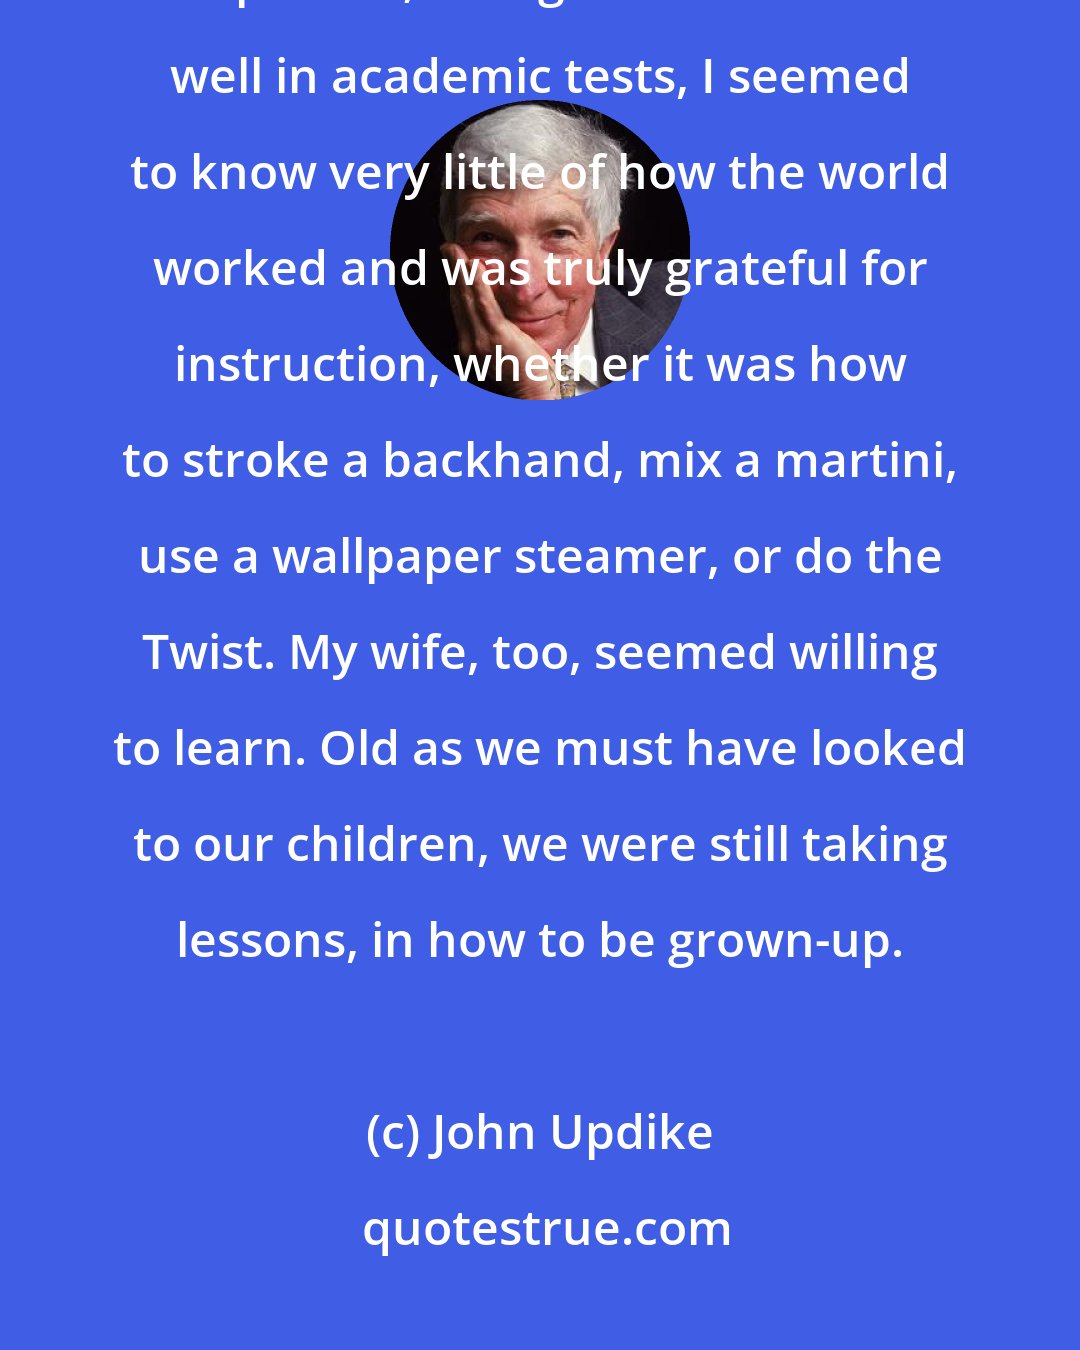 John Updike: And there was, in those Ipswich years, for me at least, a raw educational component; though I used to score well in academic tests, I seemed to know very little of how the world worked and was truly grateful for instruction, whether it was how to stroke a backhand, mix a martini, use a wallpaper steamer, or do the Twist. My wife, too, seemed willing to learn. Old as we must have looked to our children, we were still taking lessons, in how to be grown-up.